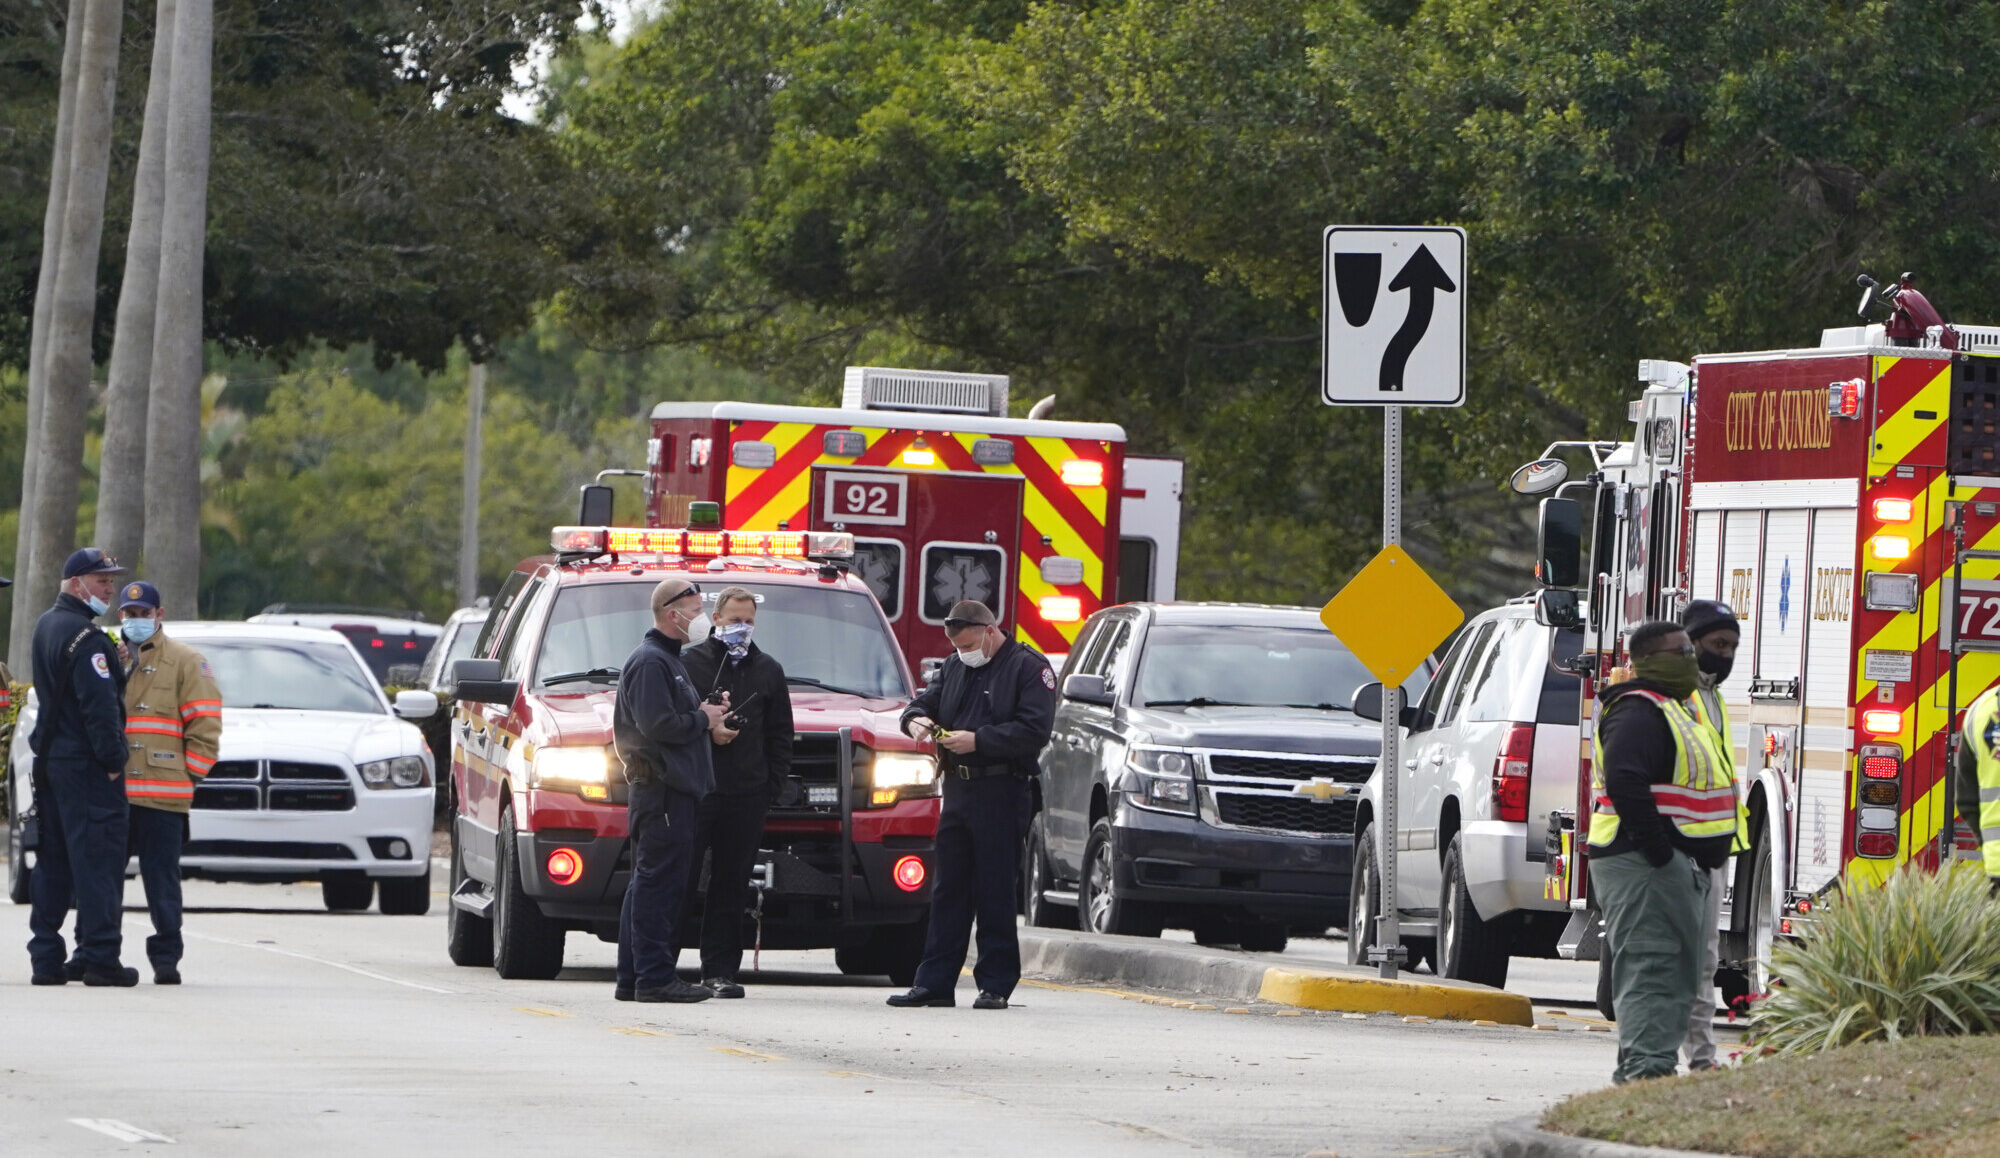 FBI: 2 Agents Killed, 3 Wounded, Suspect Dead in Florida